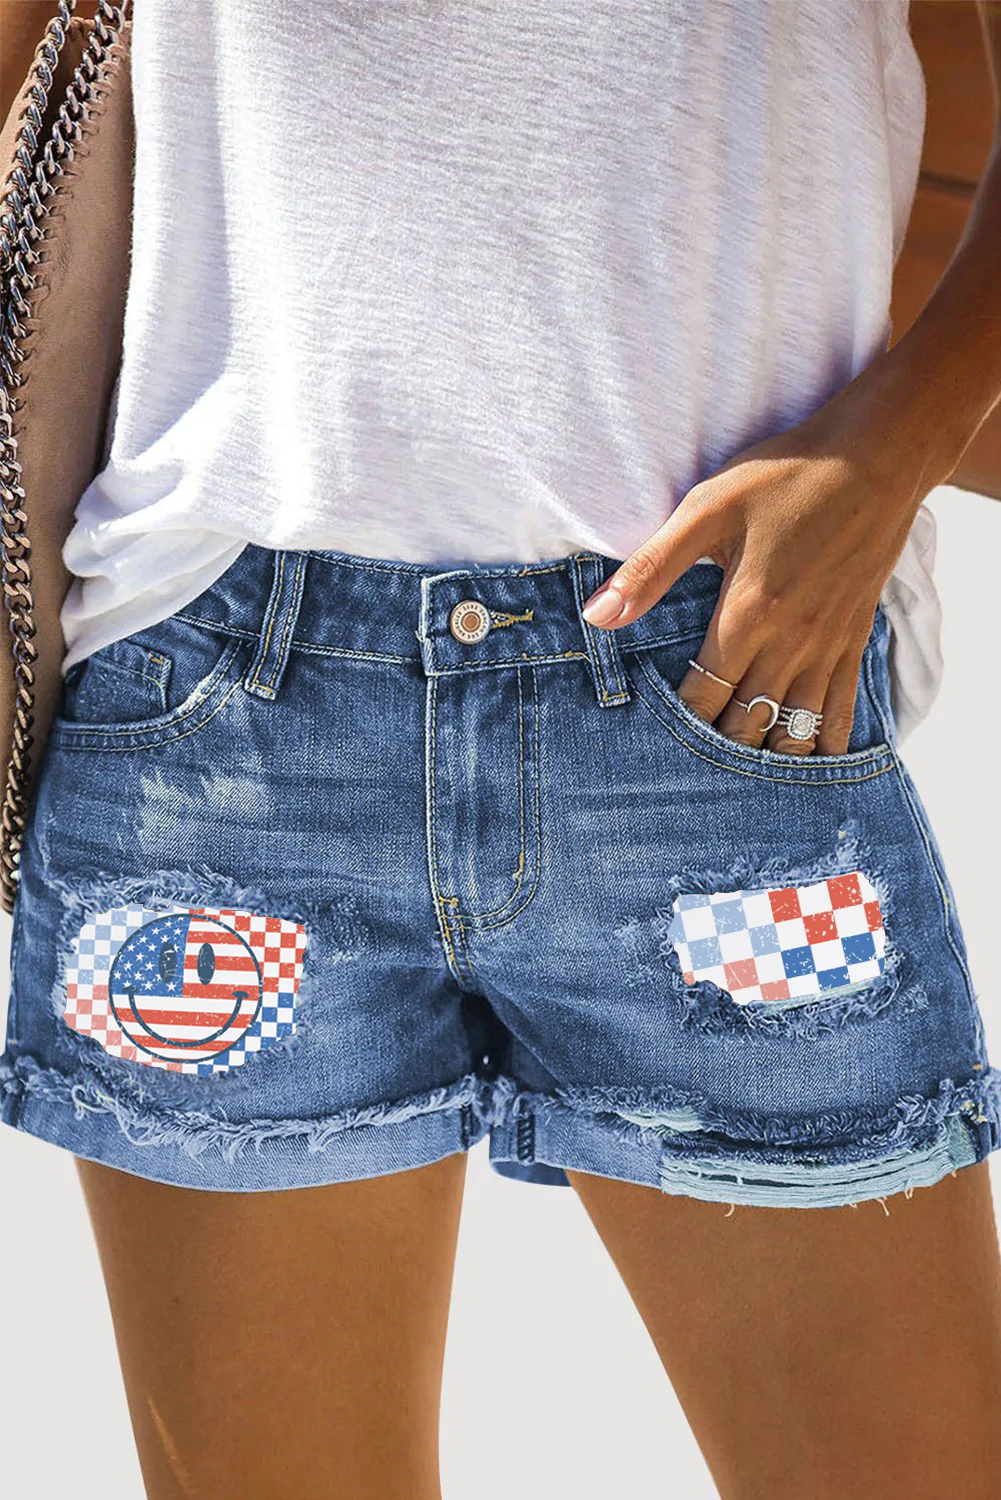 4th of July jeans